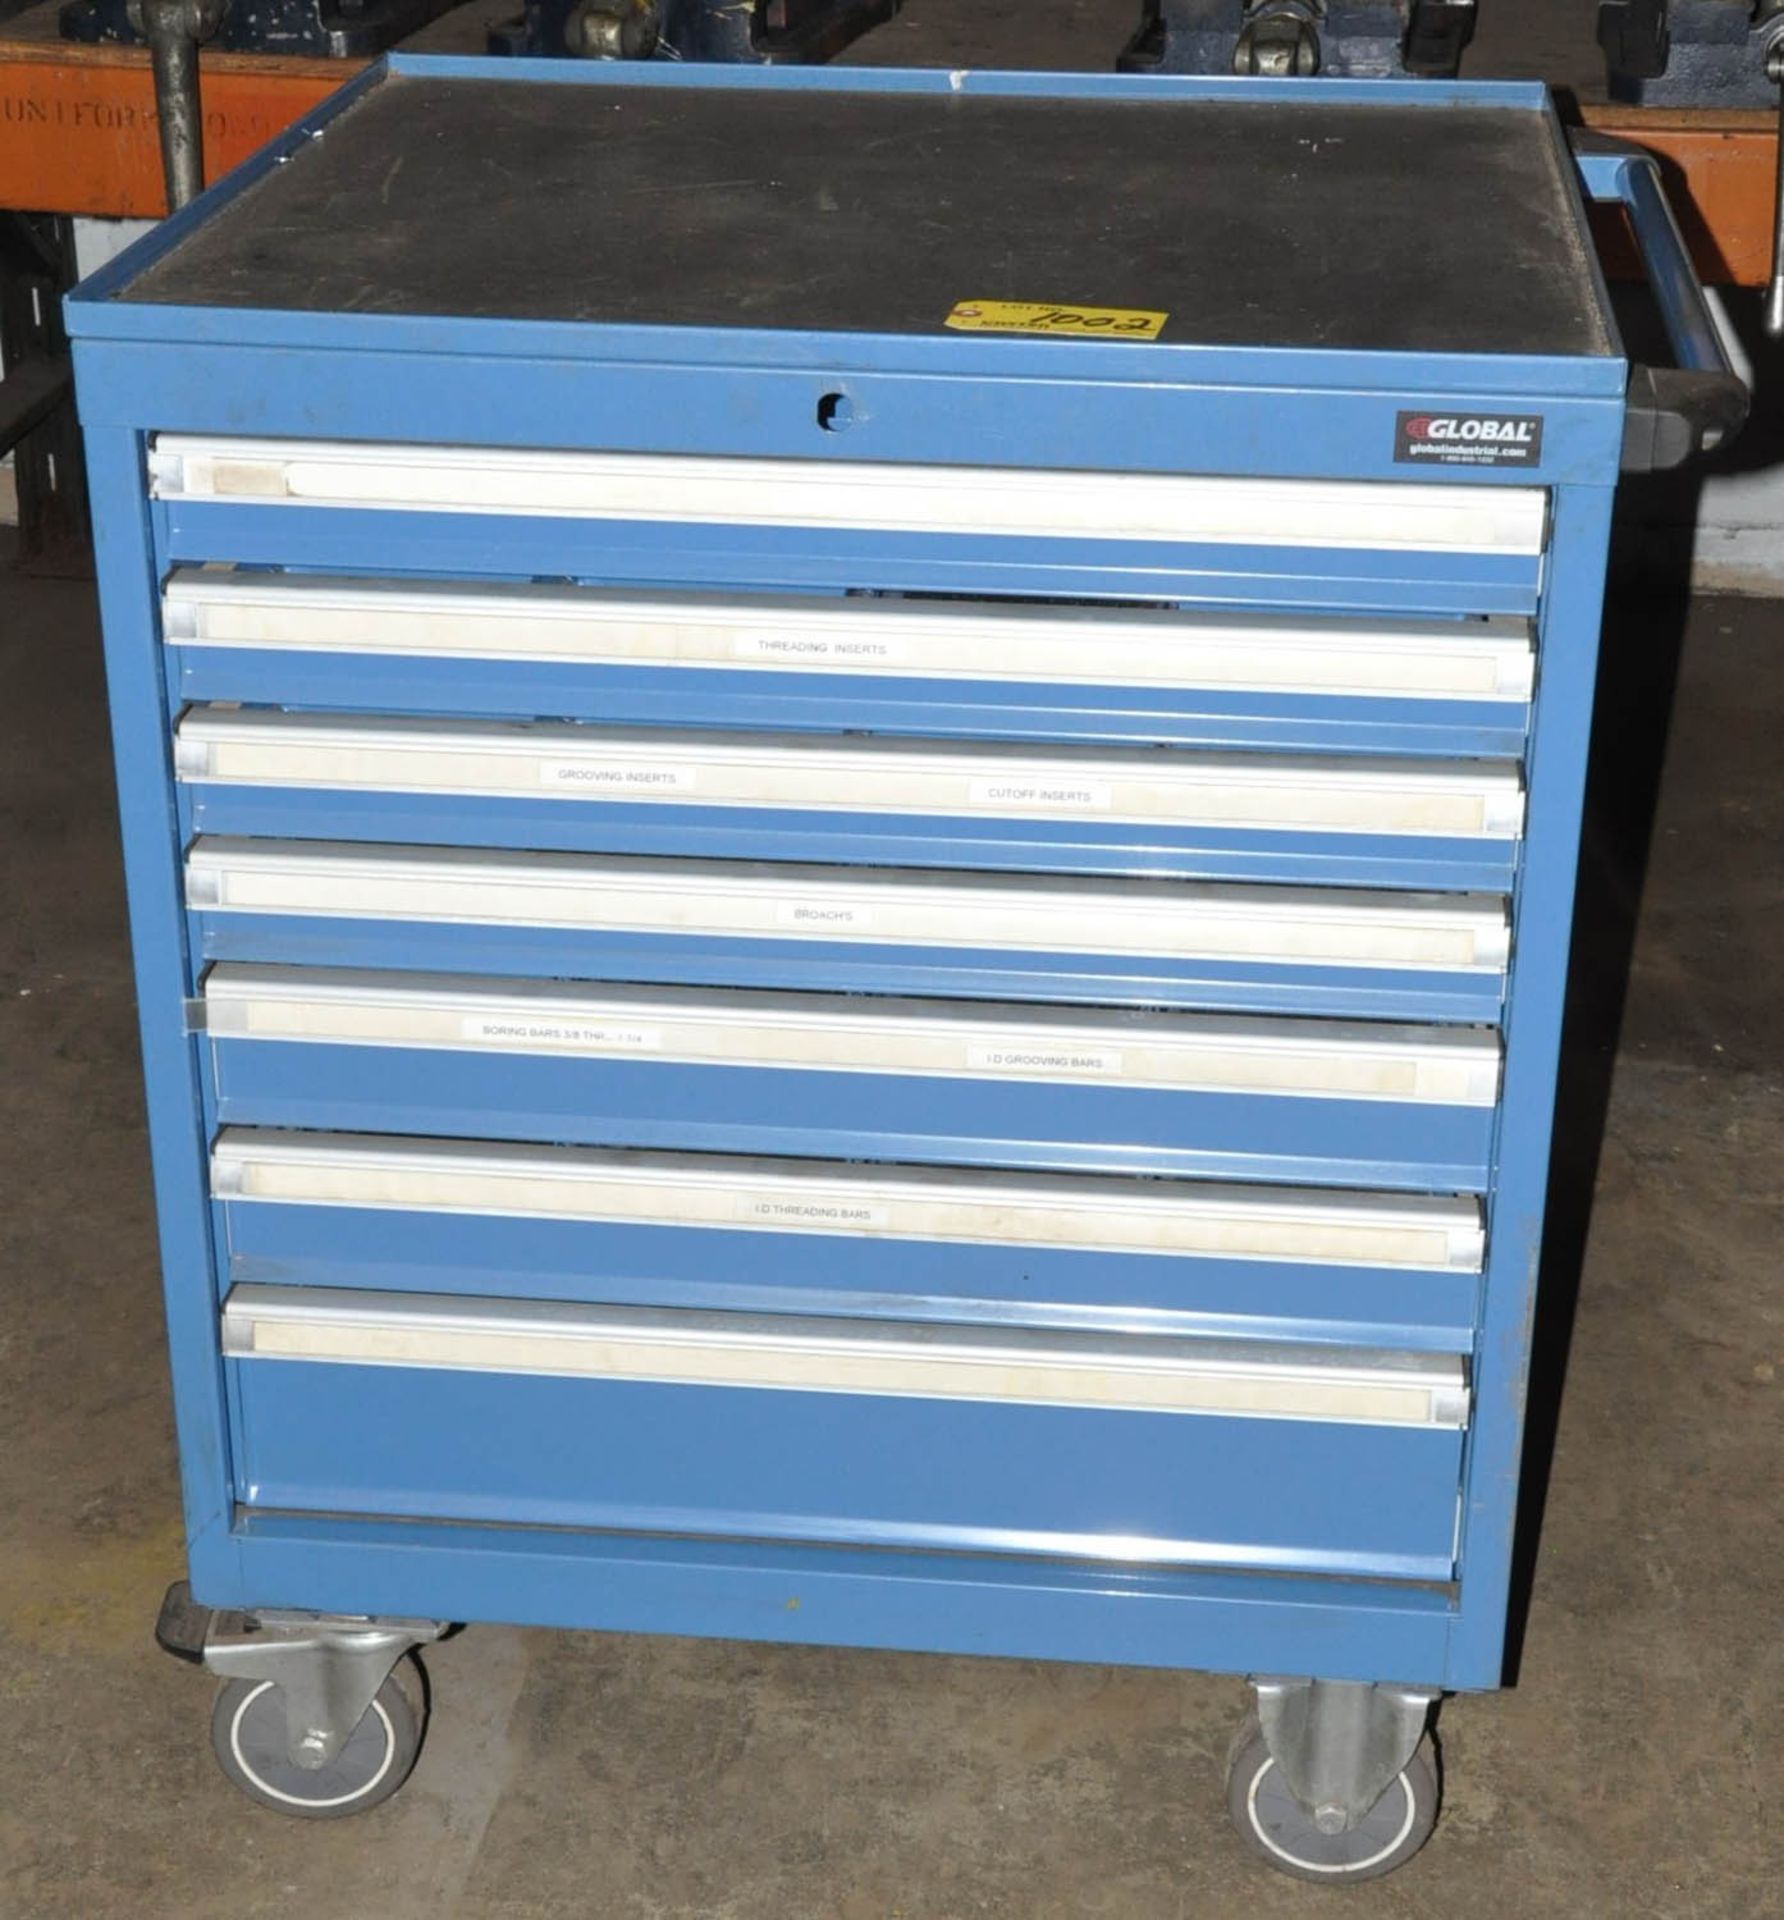 GLOBAL 7-DRAWER PORTABLE TOOLING CABINET